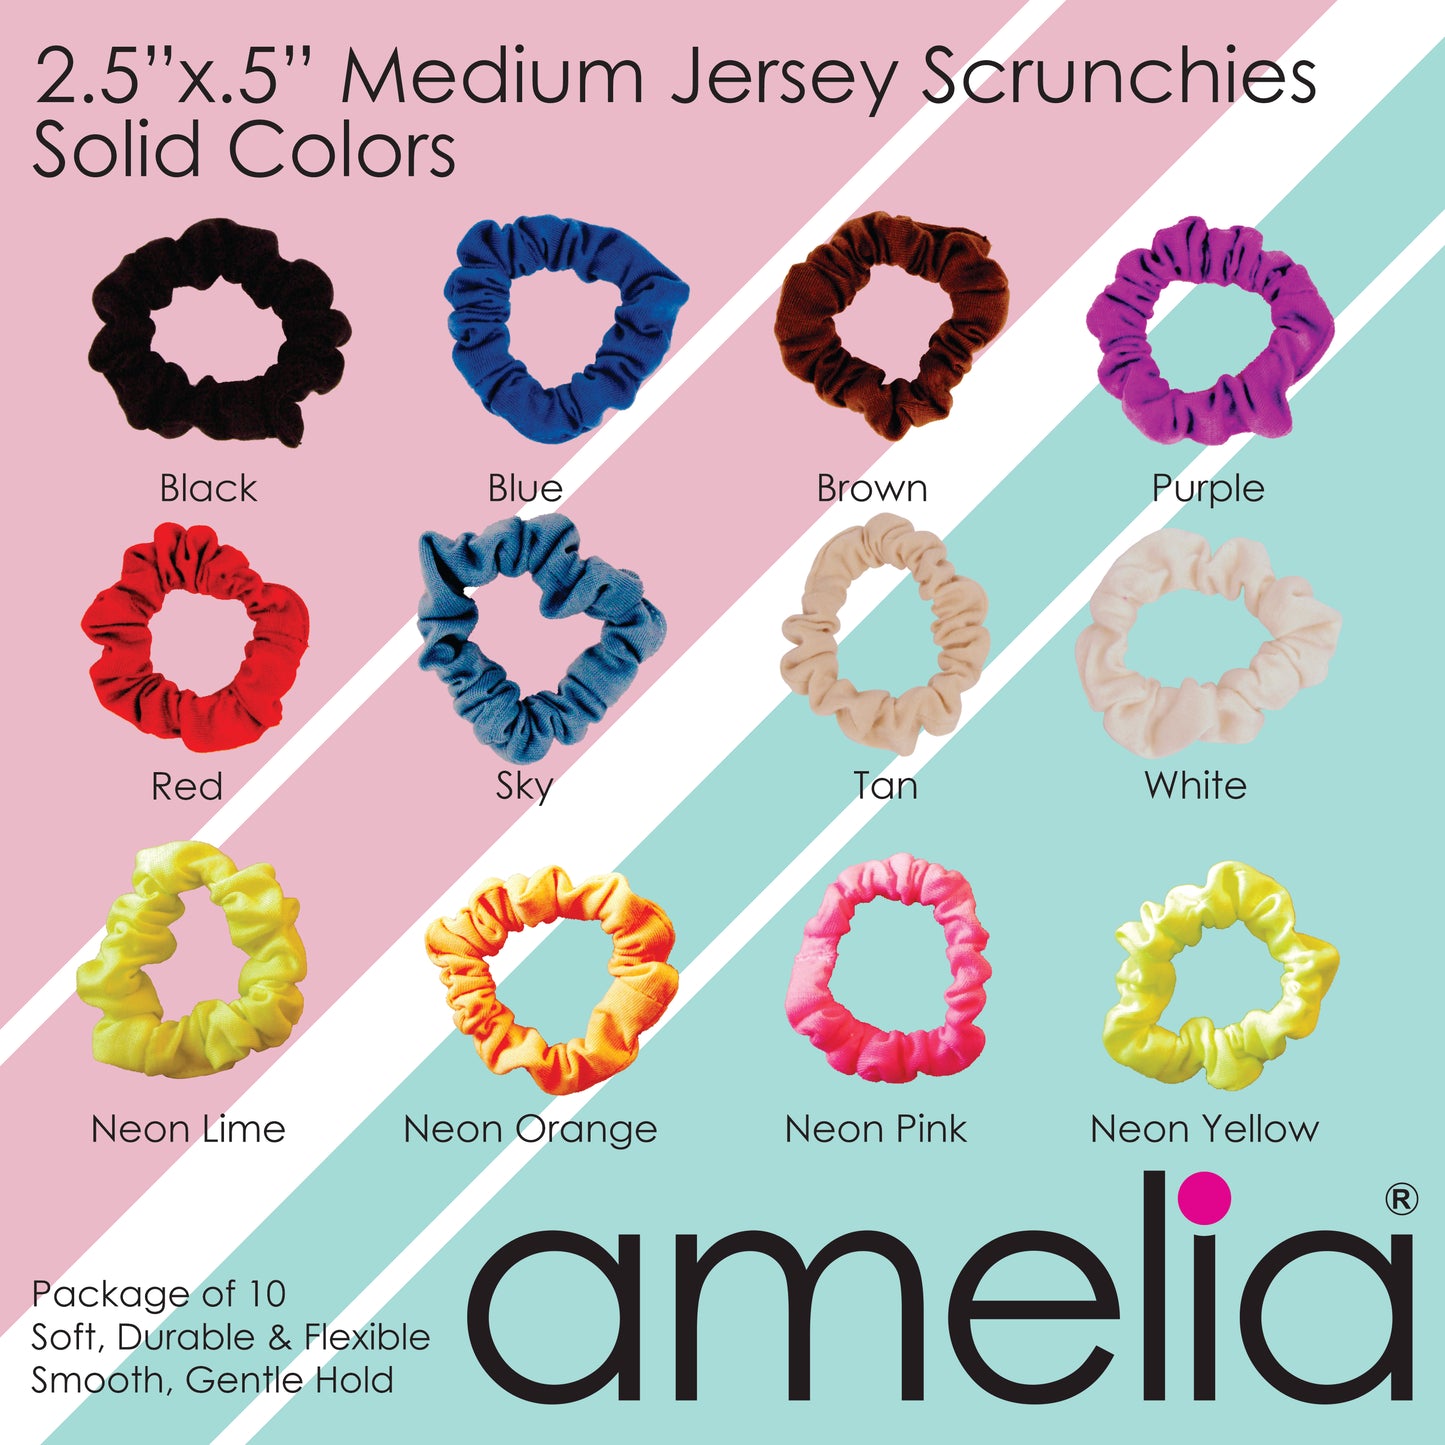 Amelia Beauty, Medium Rainbow Dot Jersey Scrunchies, 2.5in Diameter, Gentle on Hair, Strong Hold, No Snag, No Dents or Creases. 10 Pack